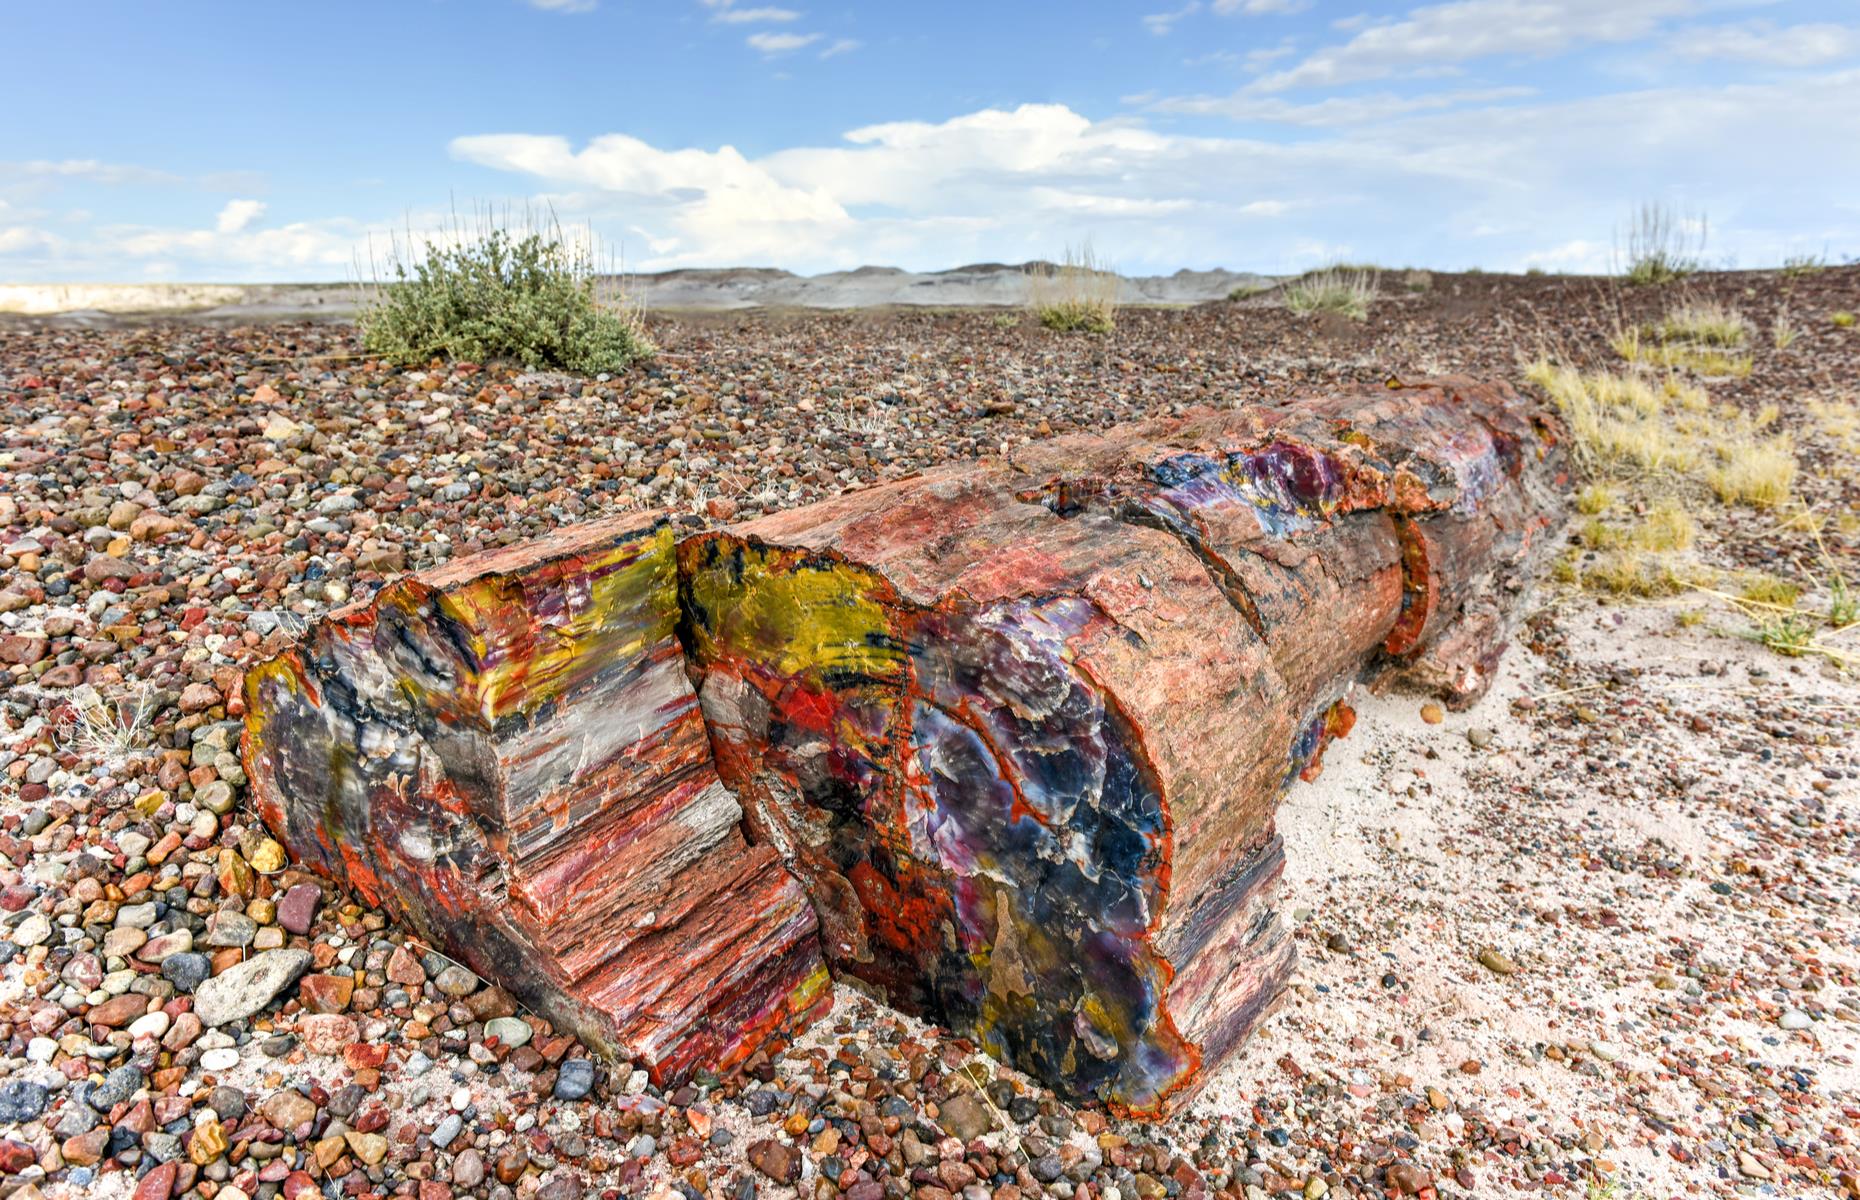 This curious national park in northeastern Arizona is best known for its colorful petrified trees and its intricate rock formations. The park is a great spot for hiking: opt for the Giant Logs Loop, a half-mile wander that takes in the many fallen, fossilized trees, their rainbow cores glinting in the sunlight. The Rainbow Forest Museum in the south of the park is also a great place to learn about the site's history and geology.